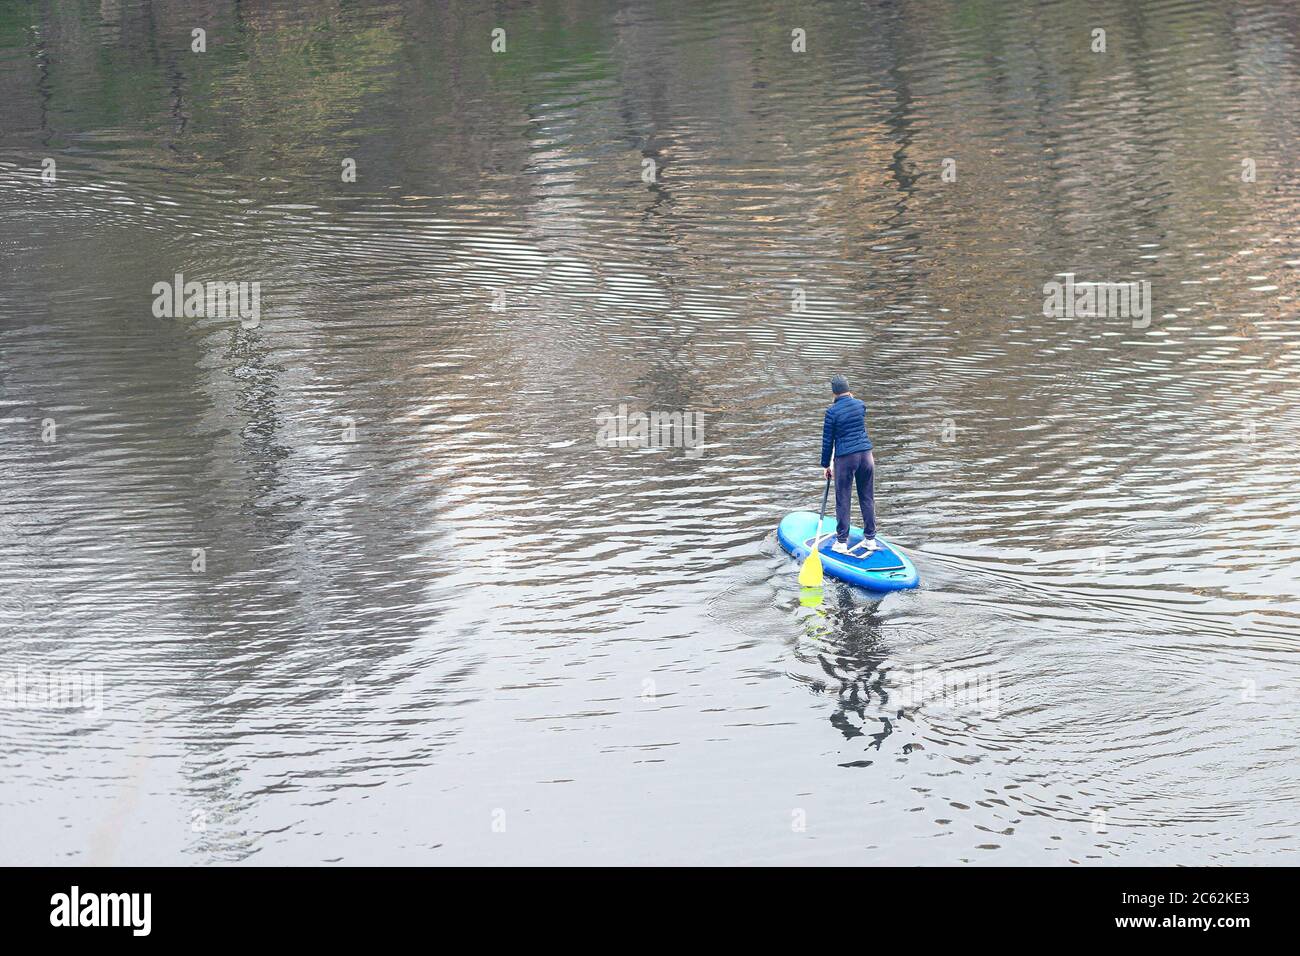 Top view of trained woman standing on the stand-up paddle board and walking on the calm water of river. Girl paddling on SUP in river. Stock Photo